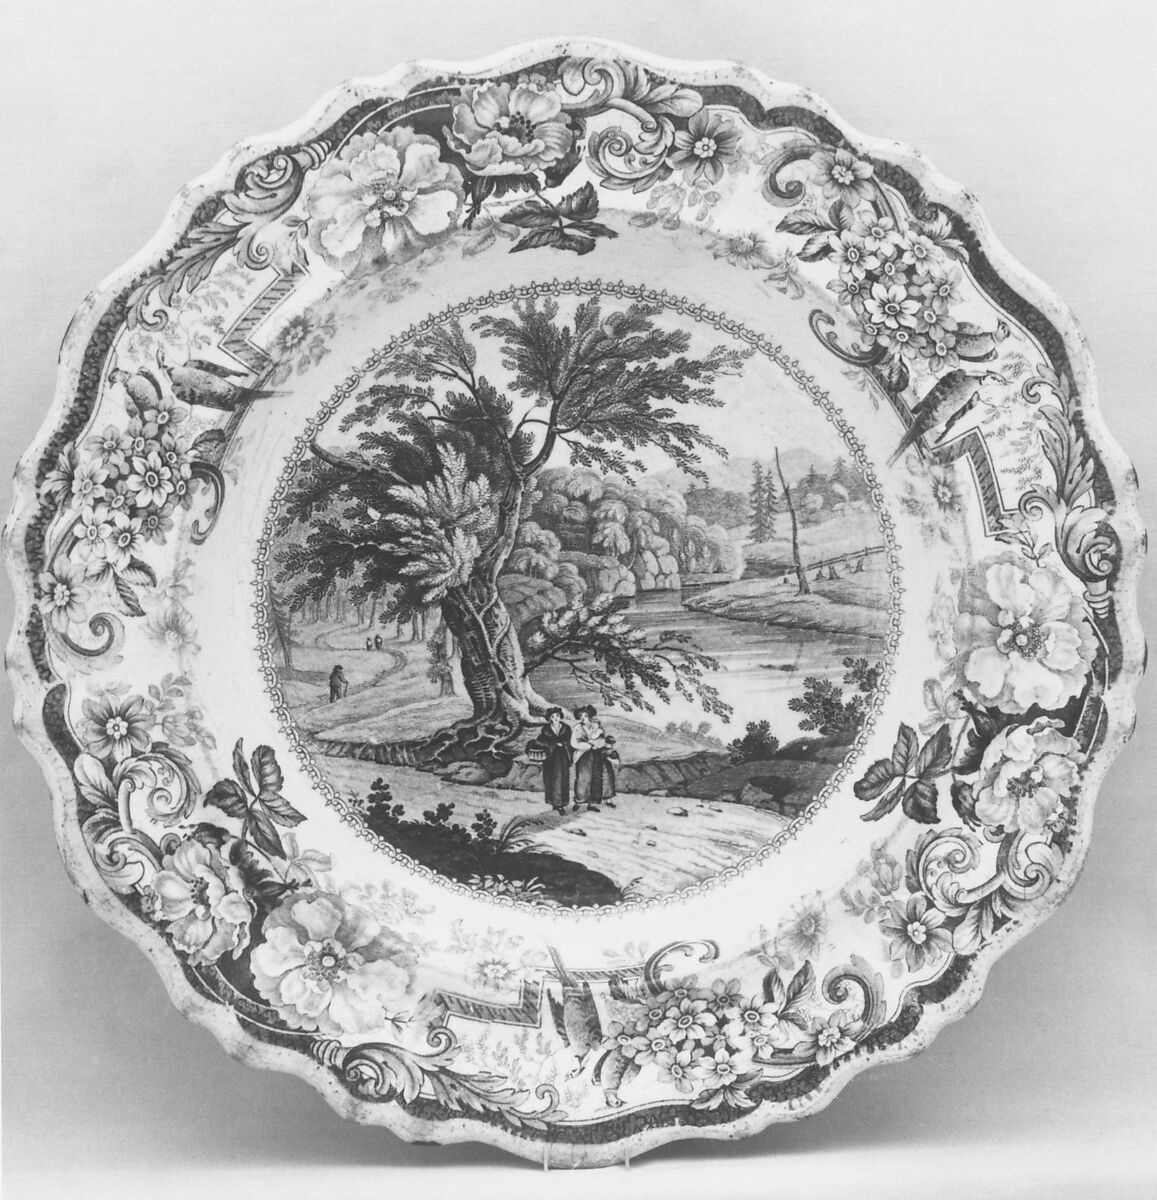 Soup Plate, James and Ralph Clews (British, Cobridge, Stoke-on-Trent, active ca. 1818–36), Earthenware, transfer-printed, British (American market) 